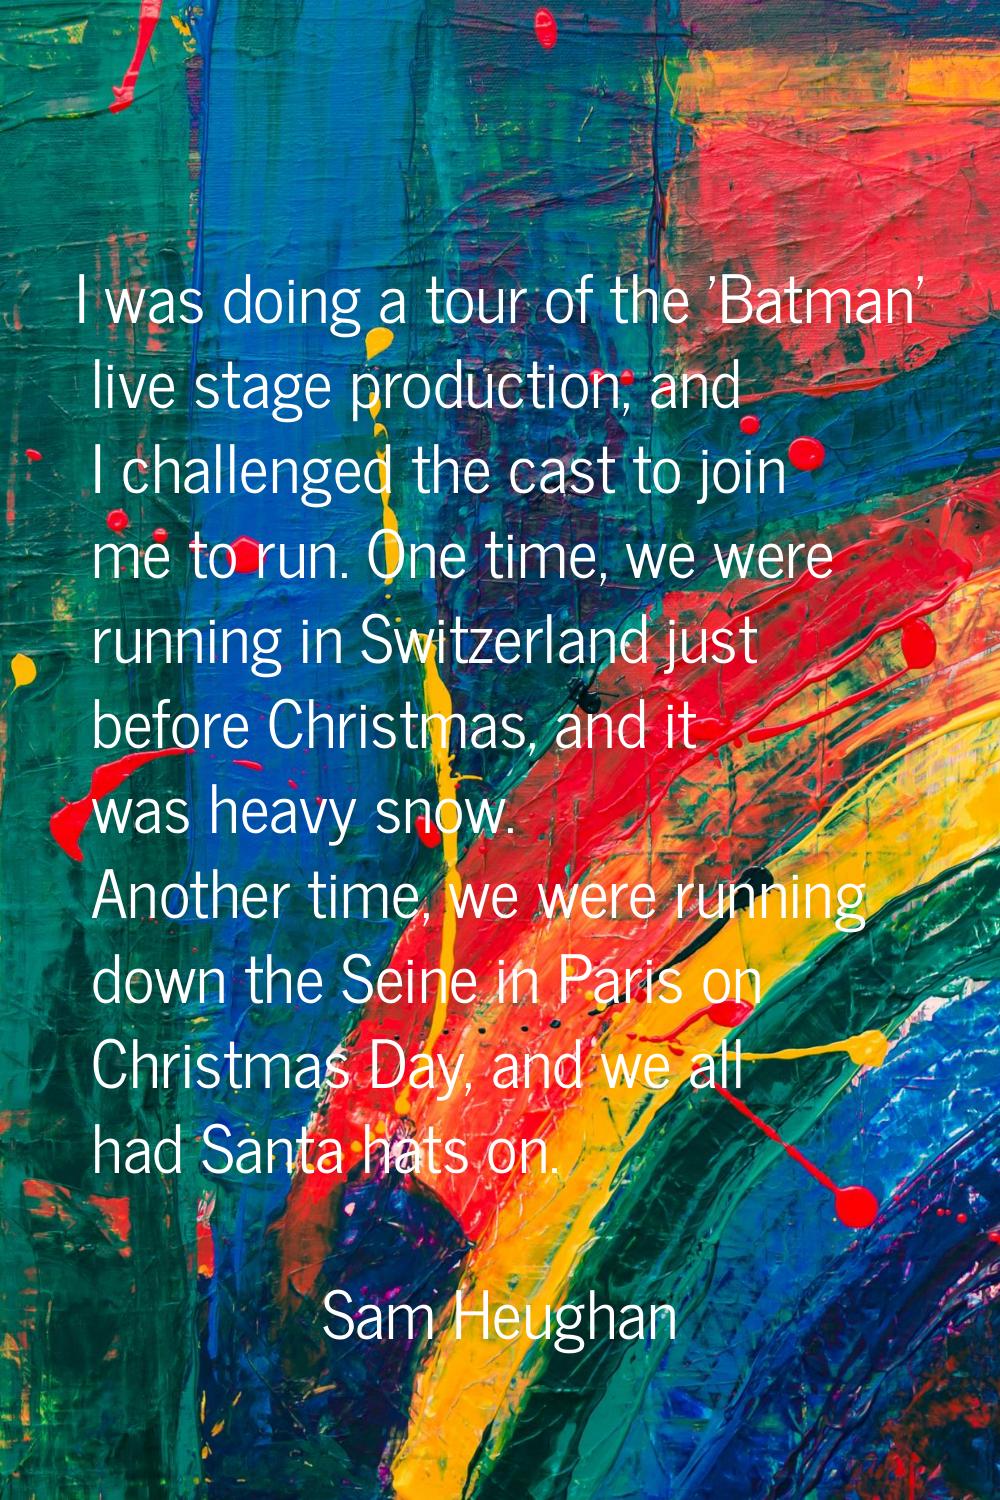 I was doing a tour of the 'Batman' live stage production, and I challenged the cast to join me to r